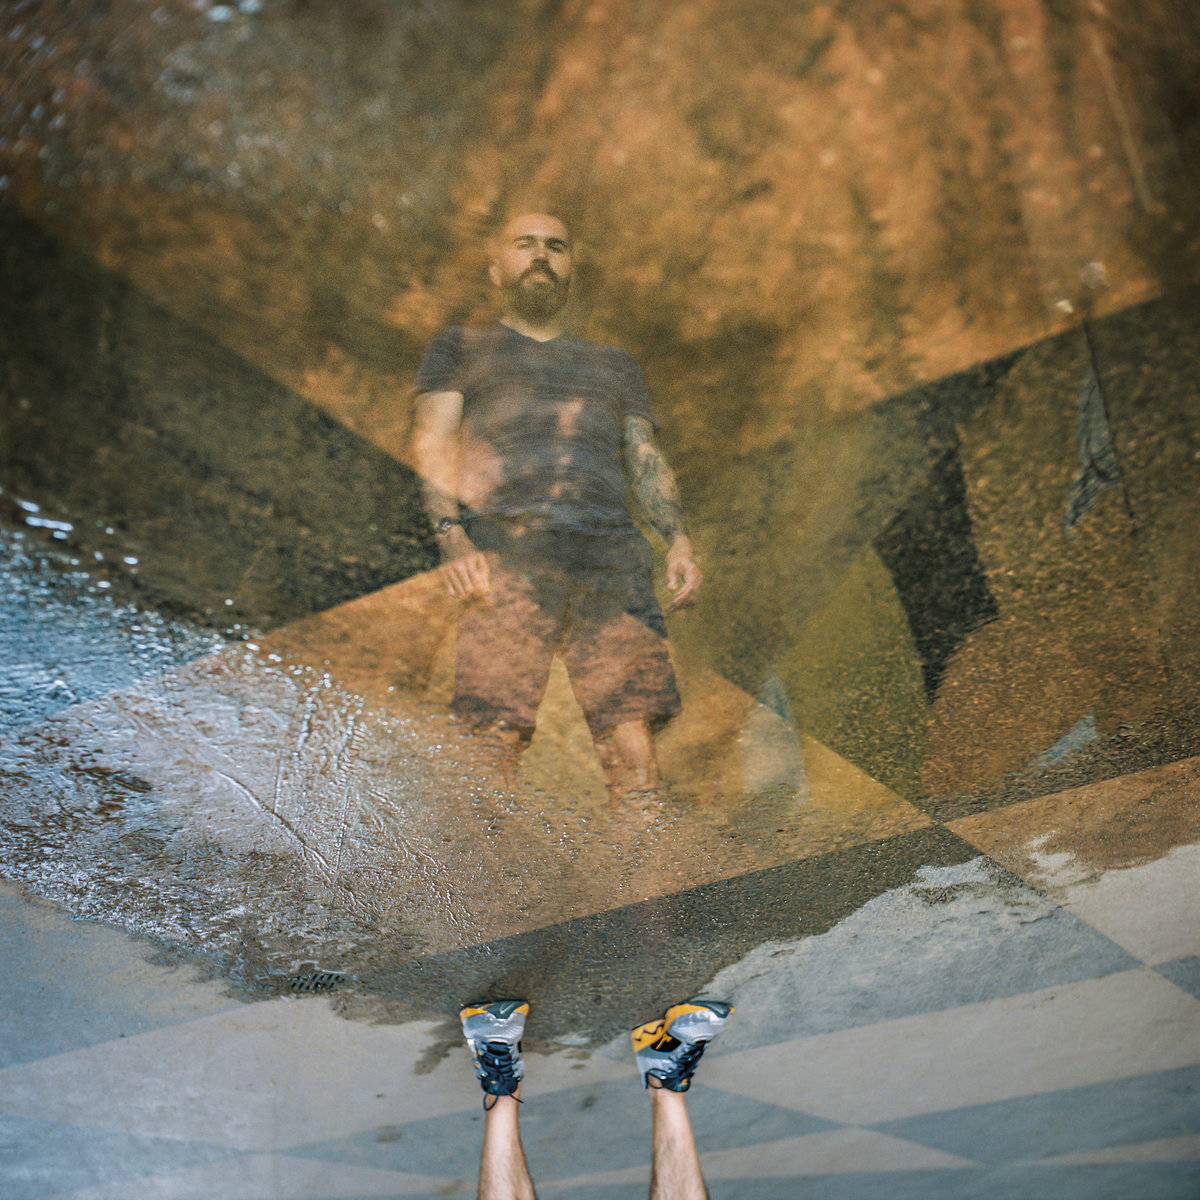 A reflection in standing water of a man upside down.